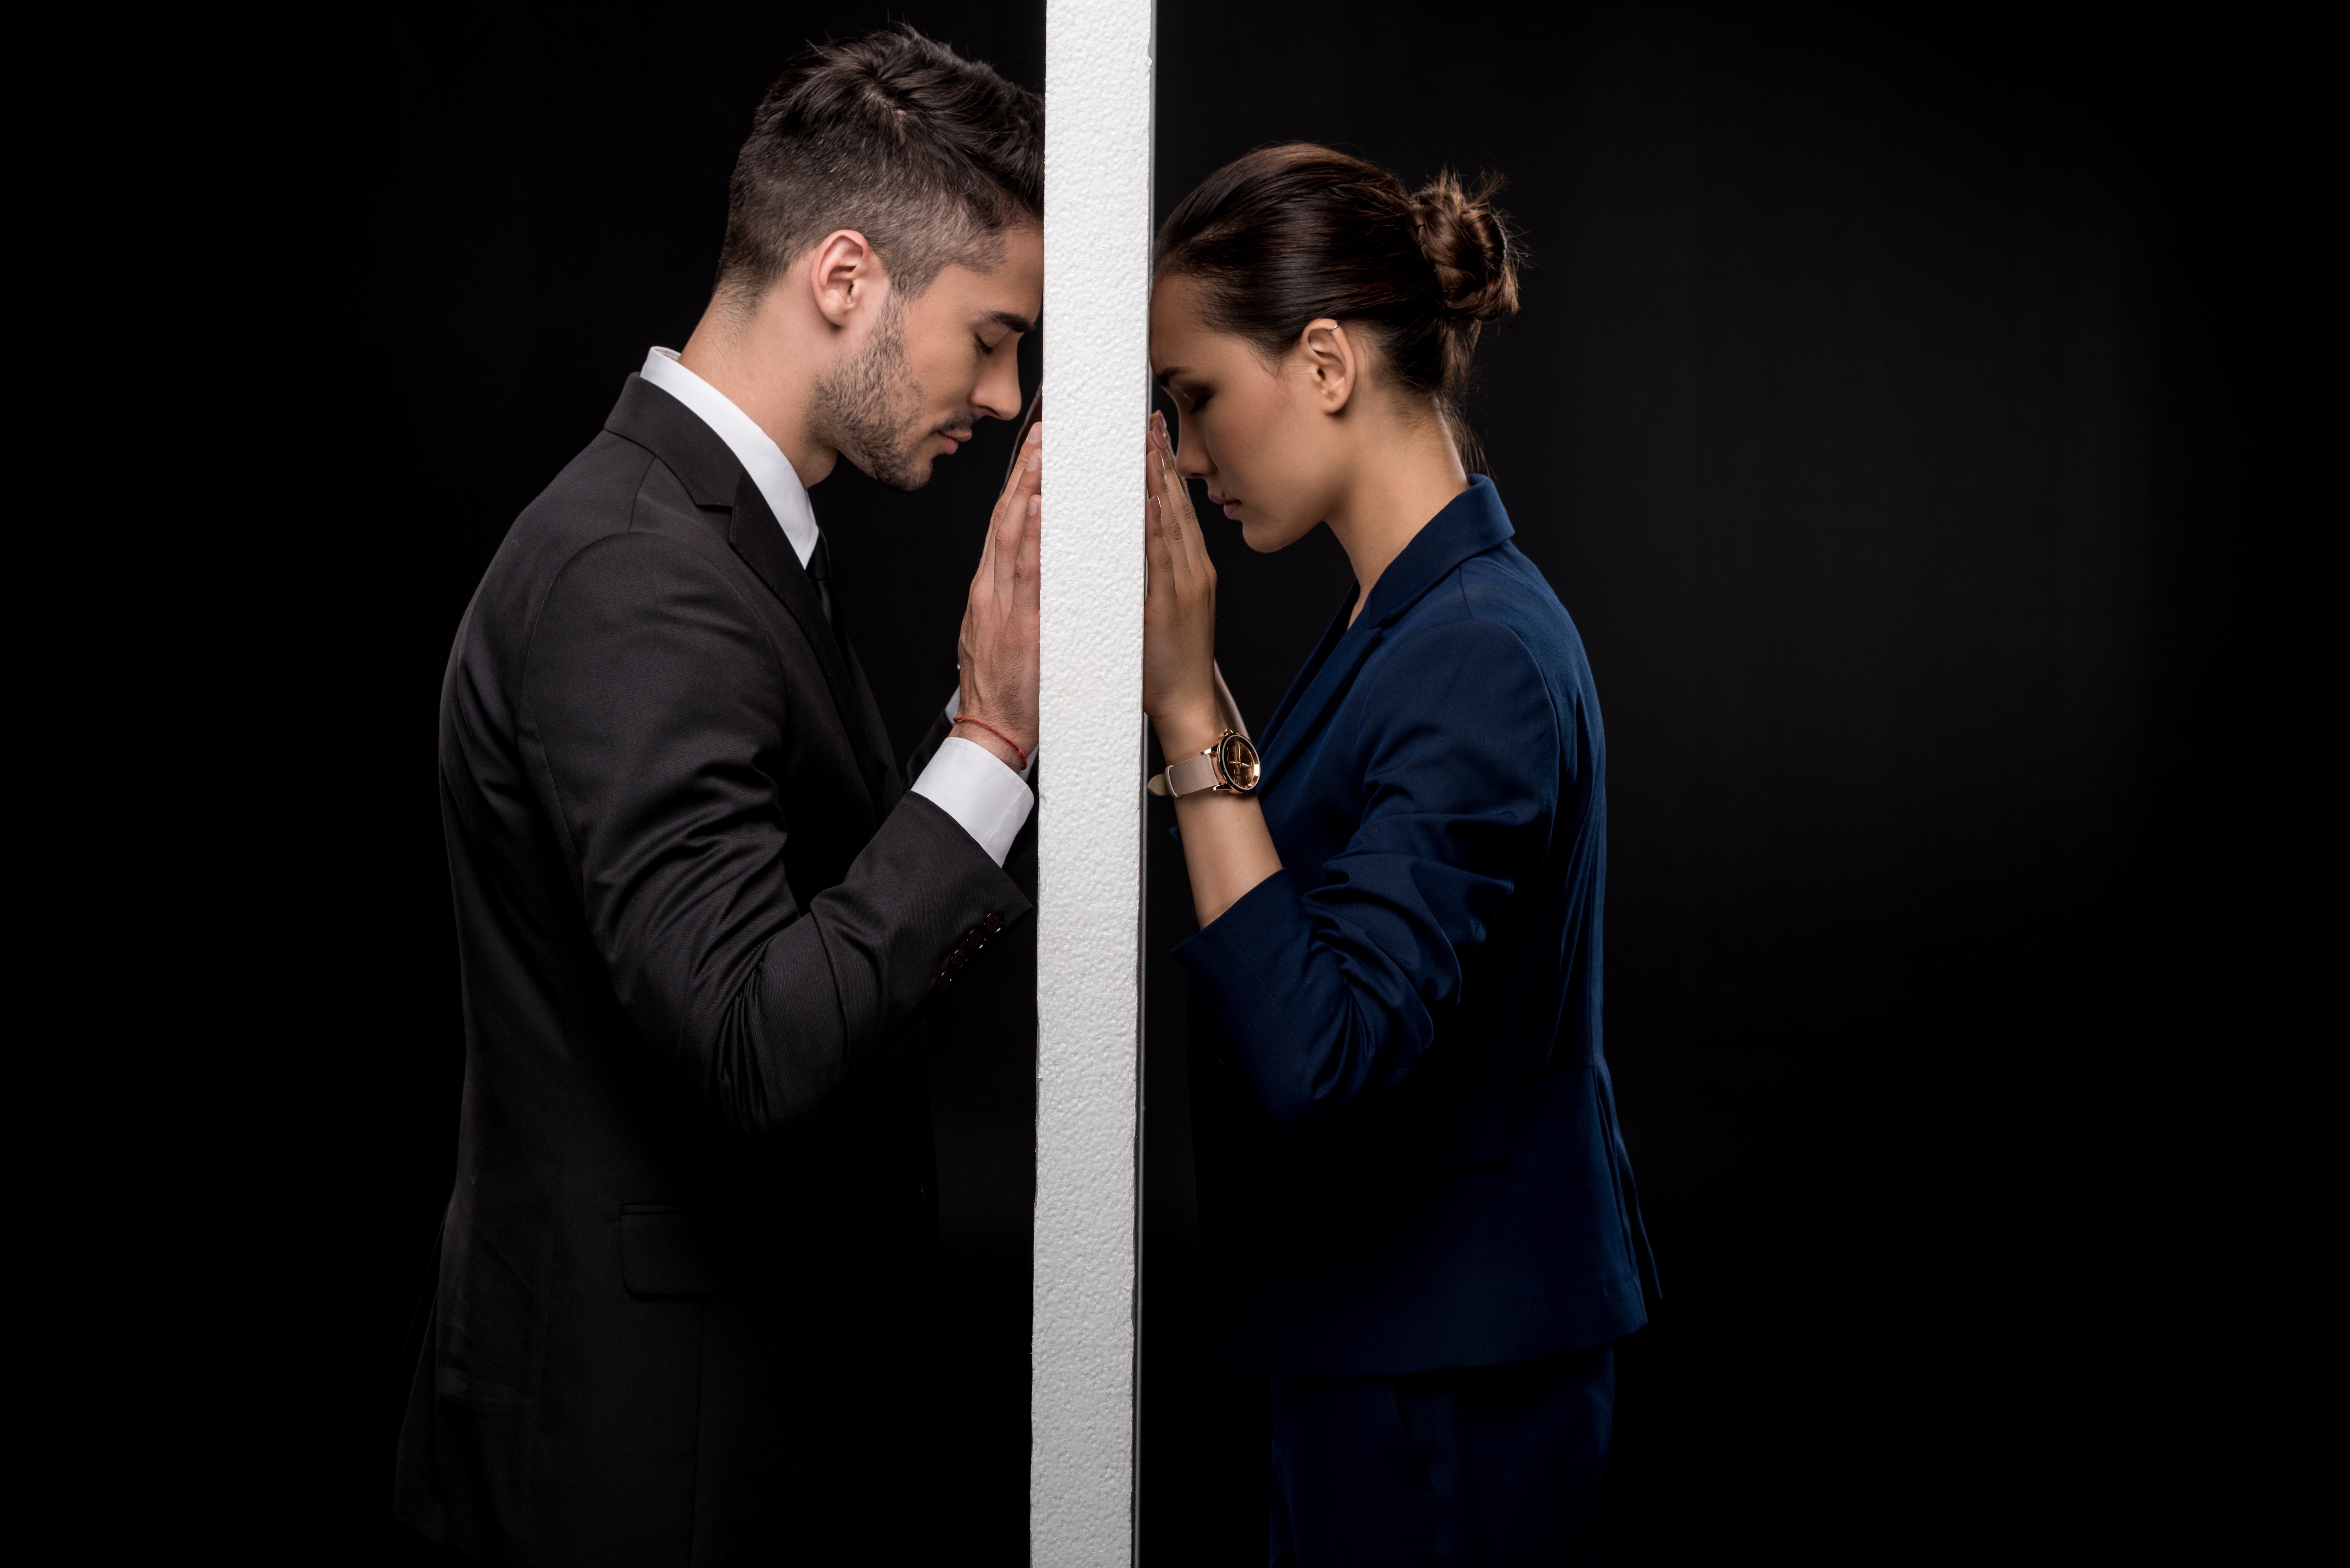 10 Things To Say That Can Break His Walls Down Womenworking